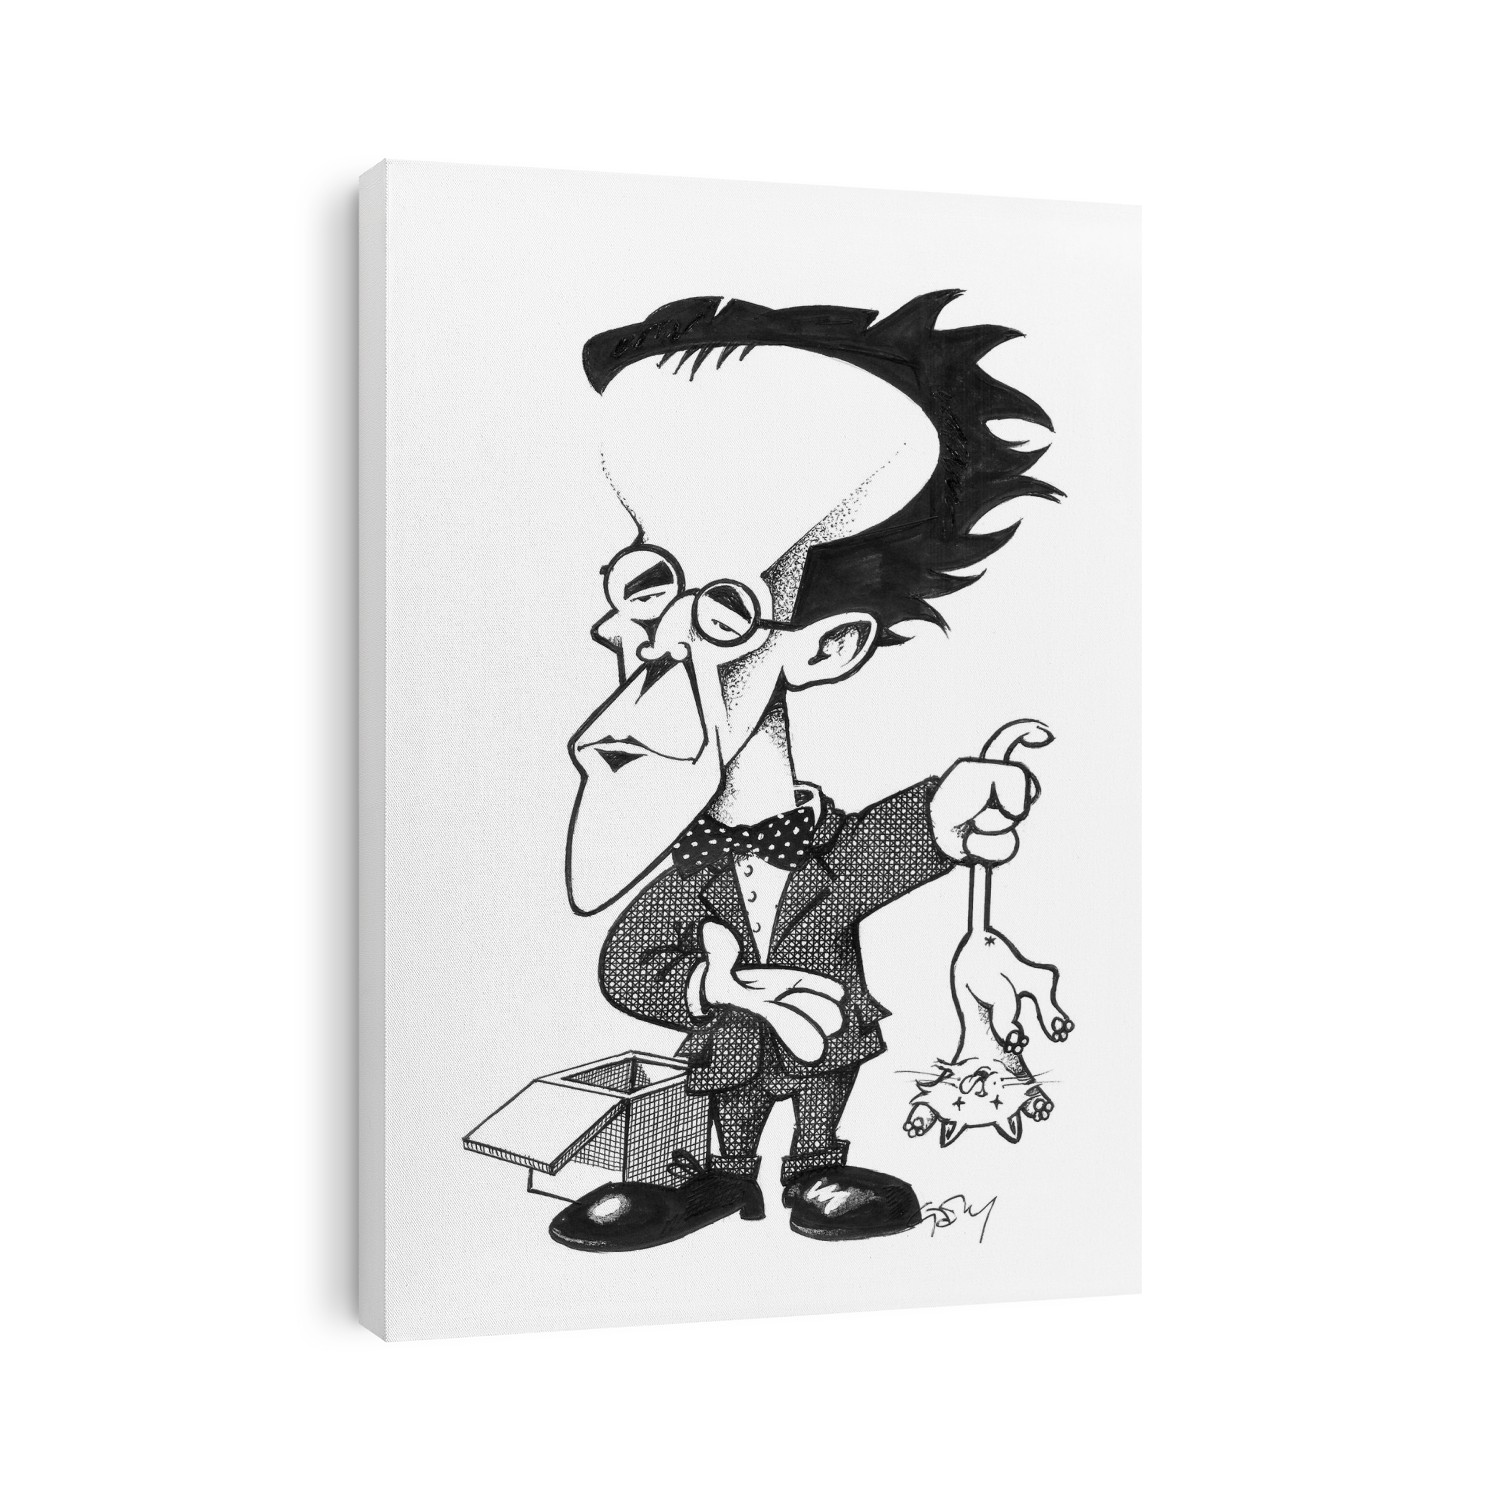 Erwin Schrodinger (1887-1961). Caricature of the Austrian physicist Erwin Schrodinger holding a cat. In 1926, Schrodinger published a series of papers that founded the science of quantum wave mechanics. His wave equation described the wave- like dual behaviour of particles, and correctly predicted the electron distribution of the hydrogen atom. He shared the 1933 Nobel Prize for Physics with Paul Dirac. He was Physics Professor at Berlin University from 1927-1933, eventually settling in Ireland and retiring to Austria in 1956.